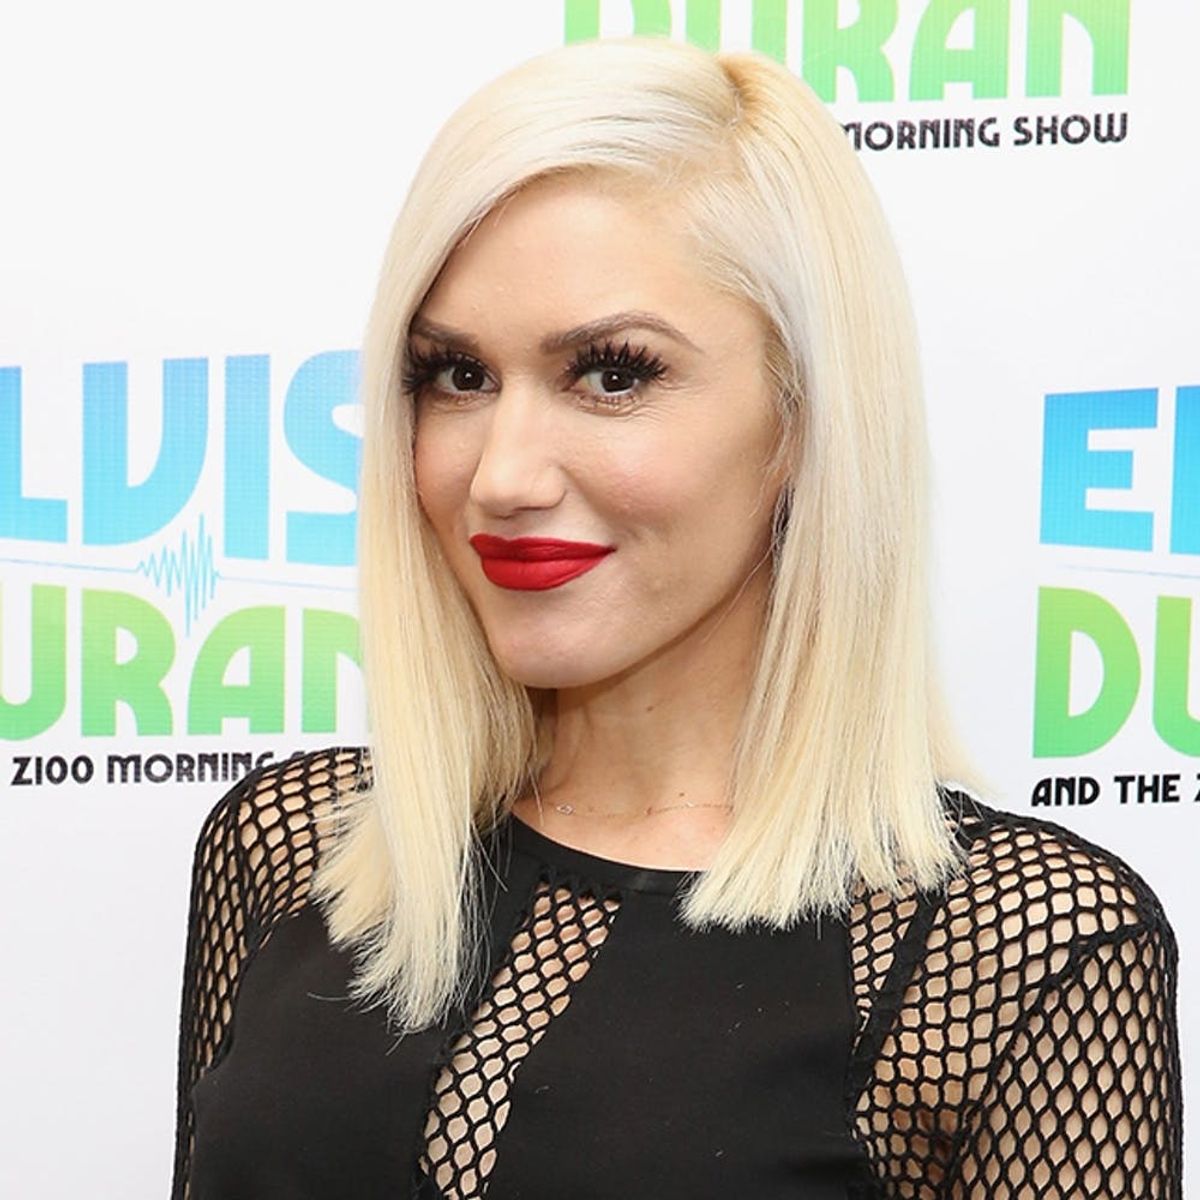 Gwen Stefani’s New Urban Decay Makeup Line Is Great News for Lipstick Lovers